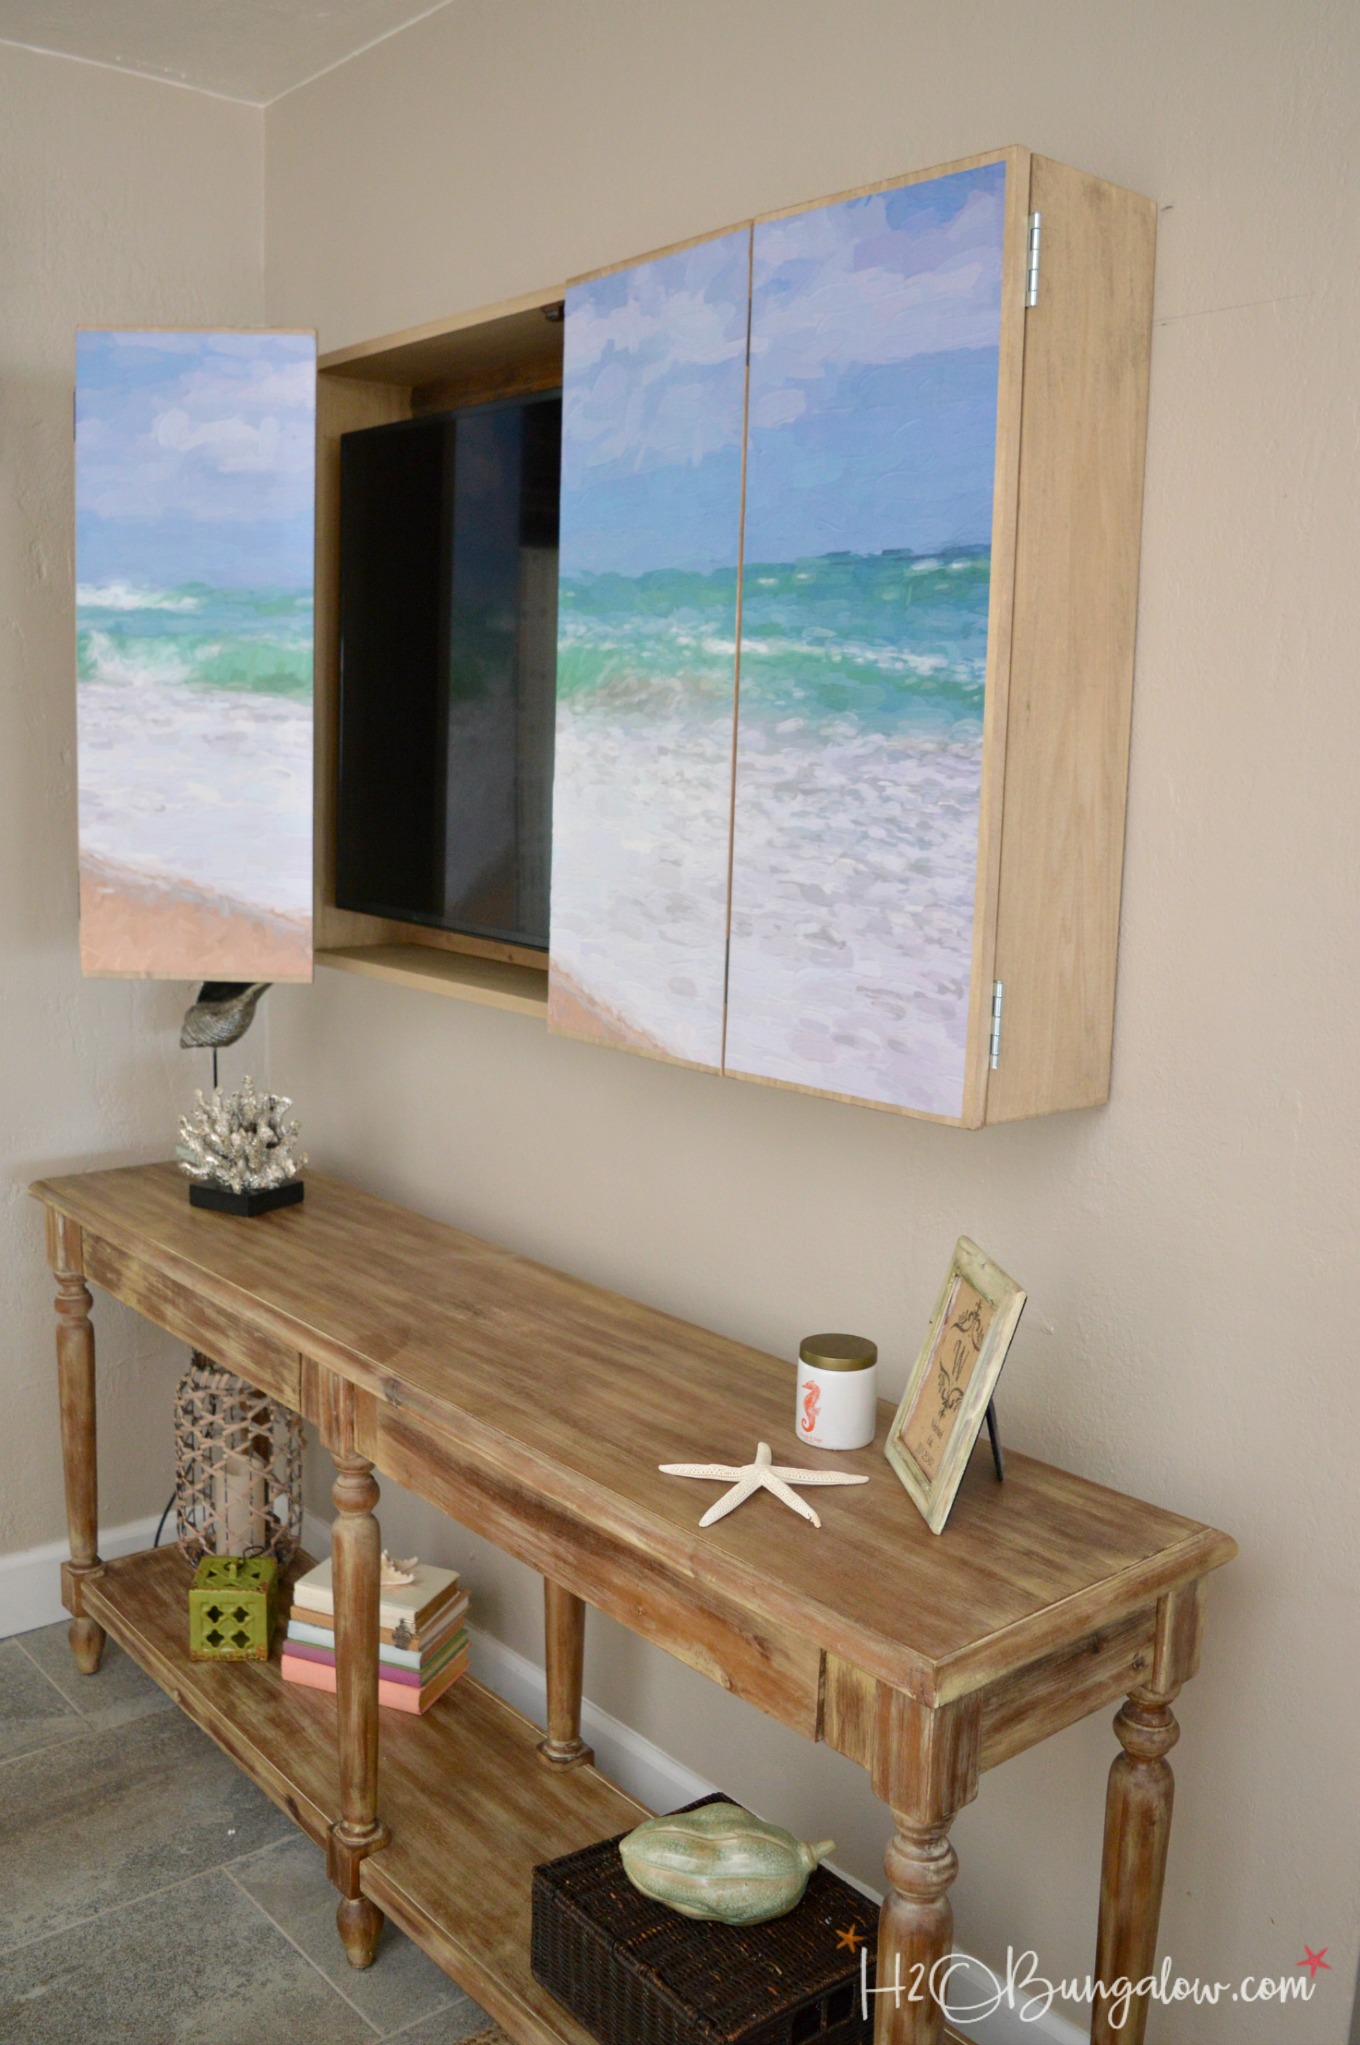 DIY Wall Mounted TV Cabinet with Free Plans - H2OBungalow